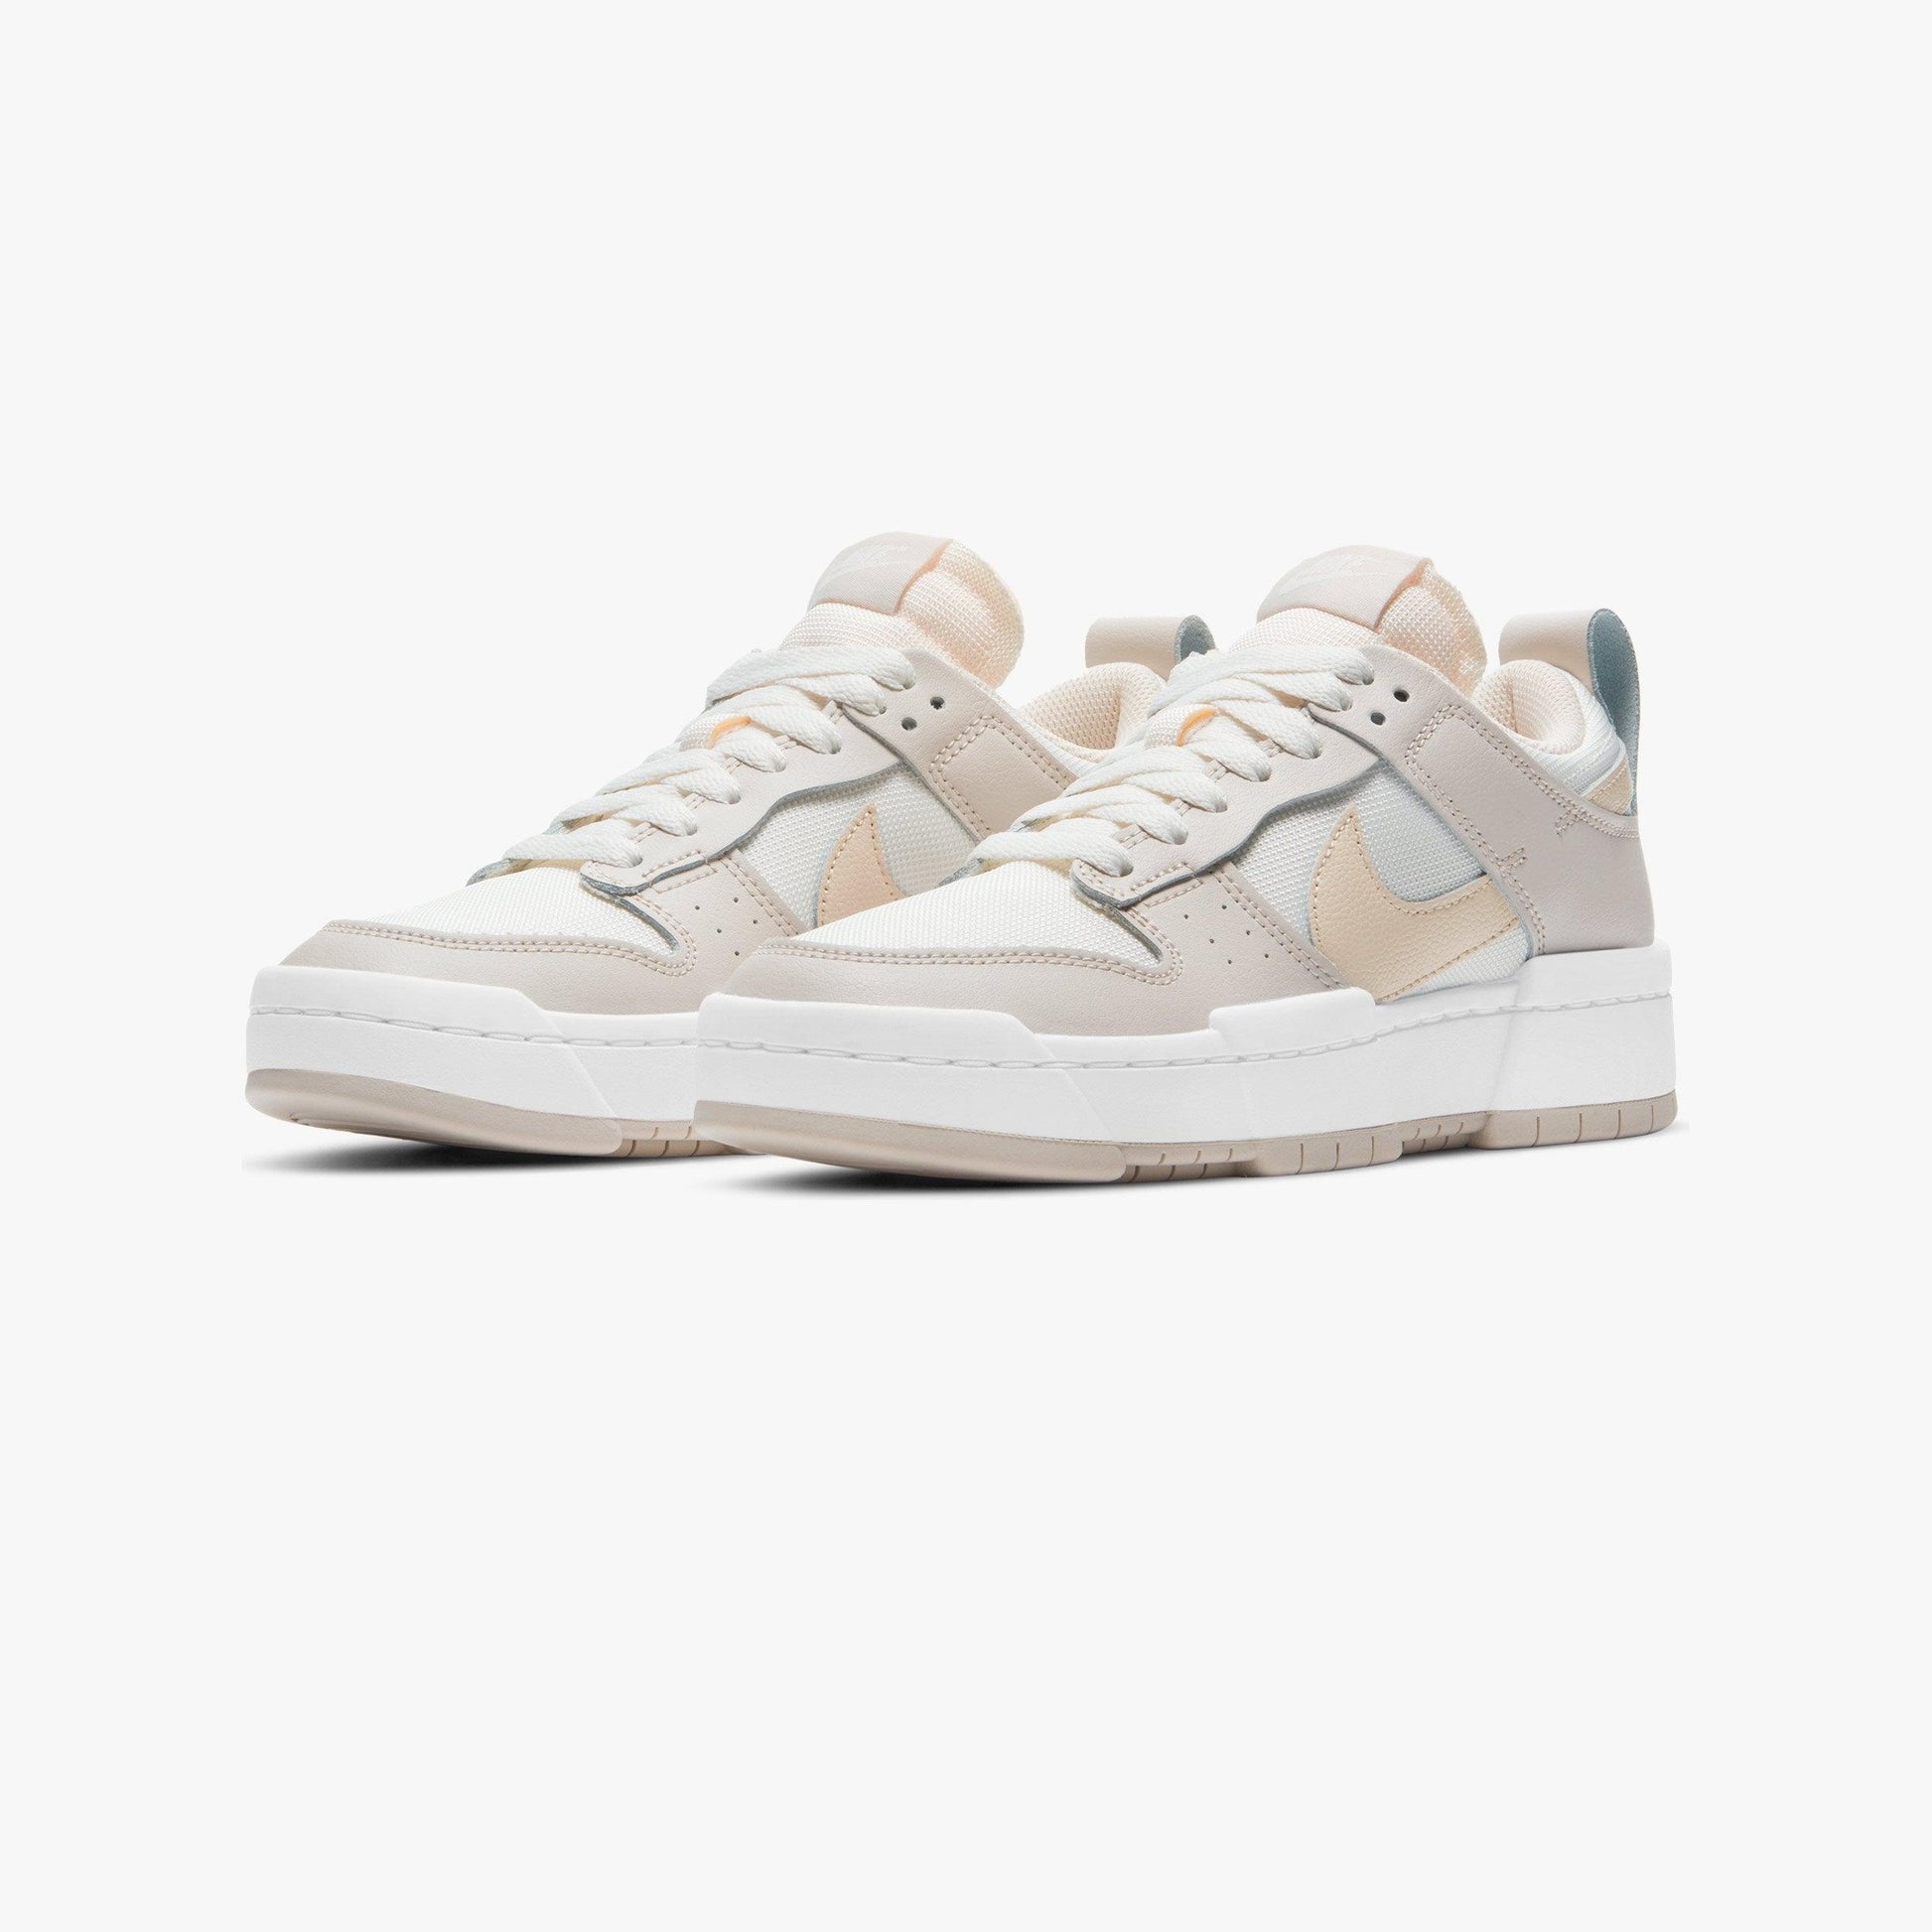 Nike Dunk Low Disrupt Women's Basketball Shoes - CADEAUME